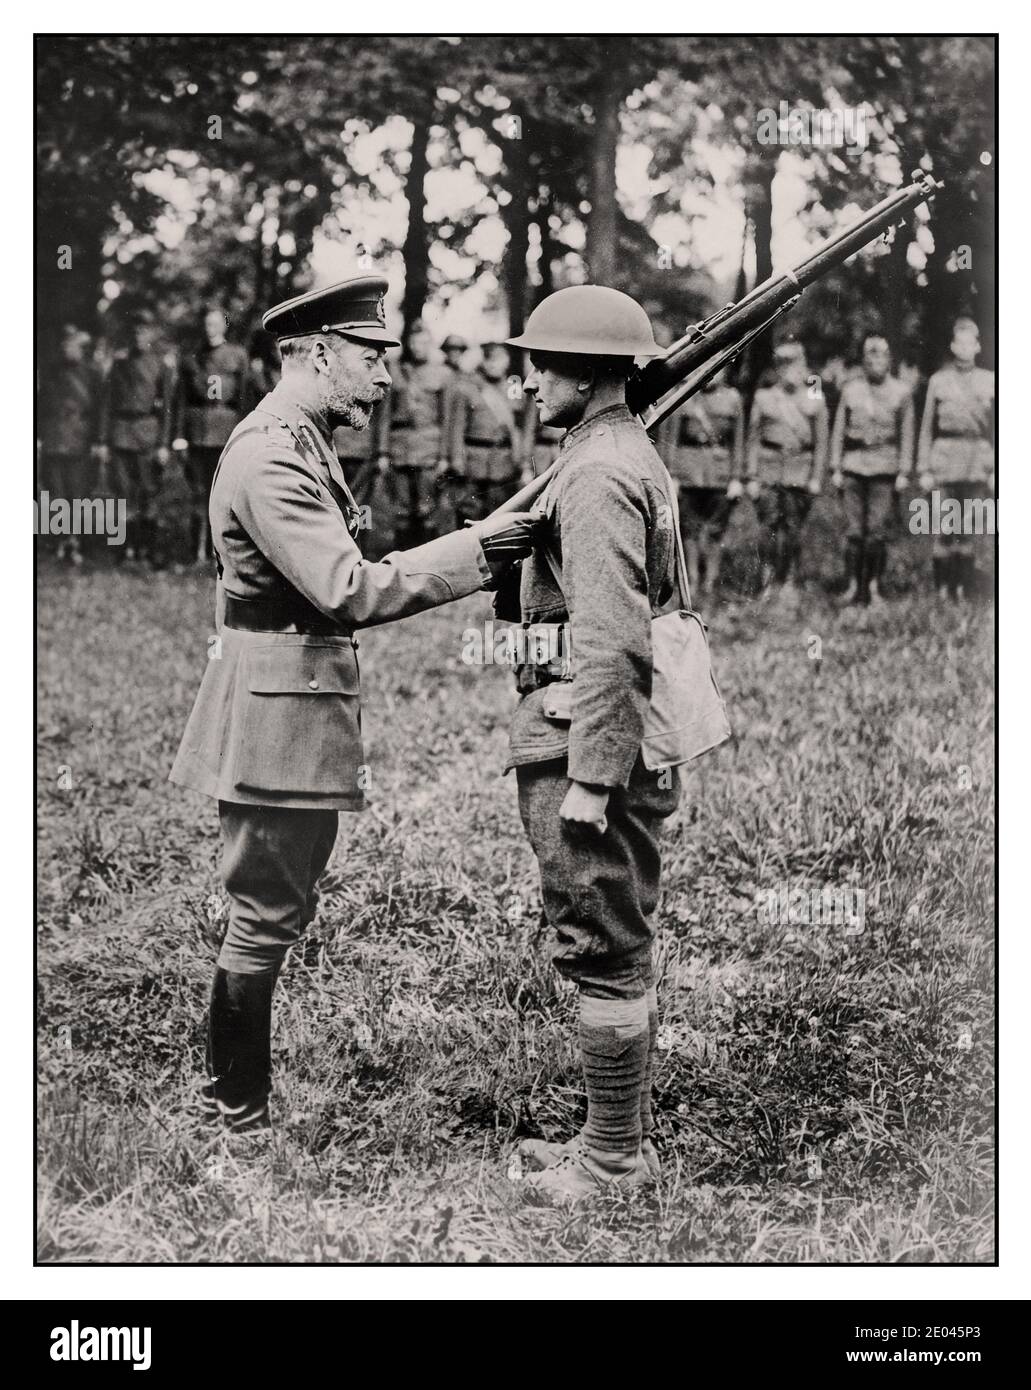 Archive WW1 King George V. with medal decorates American Soldier Photograph shows King George V of Great Britain (1865-1936) giving a medal to an American soldier in France during World War I.  Bain News Service, 1918 Oct. 5  World War, 1914-1918 Glass negatives. Photograph published in the Evening Star (Washington, D.C.), September 29, 1918. Stock Photo